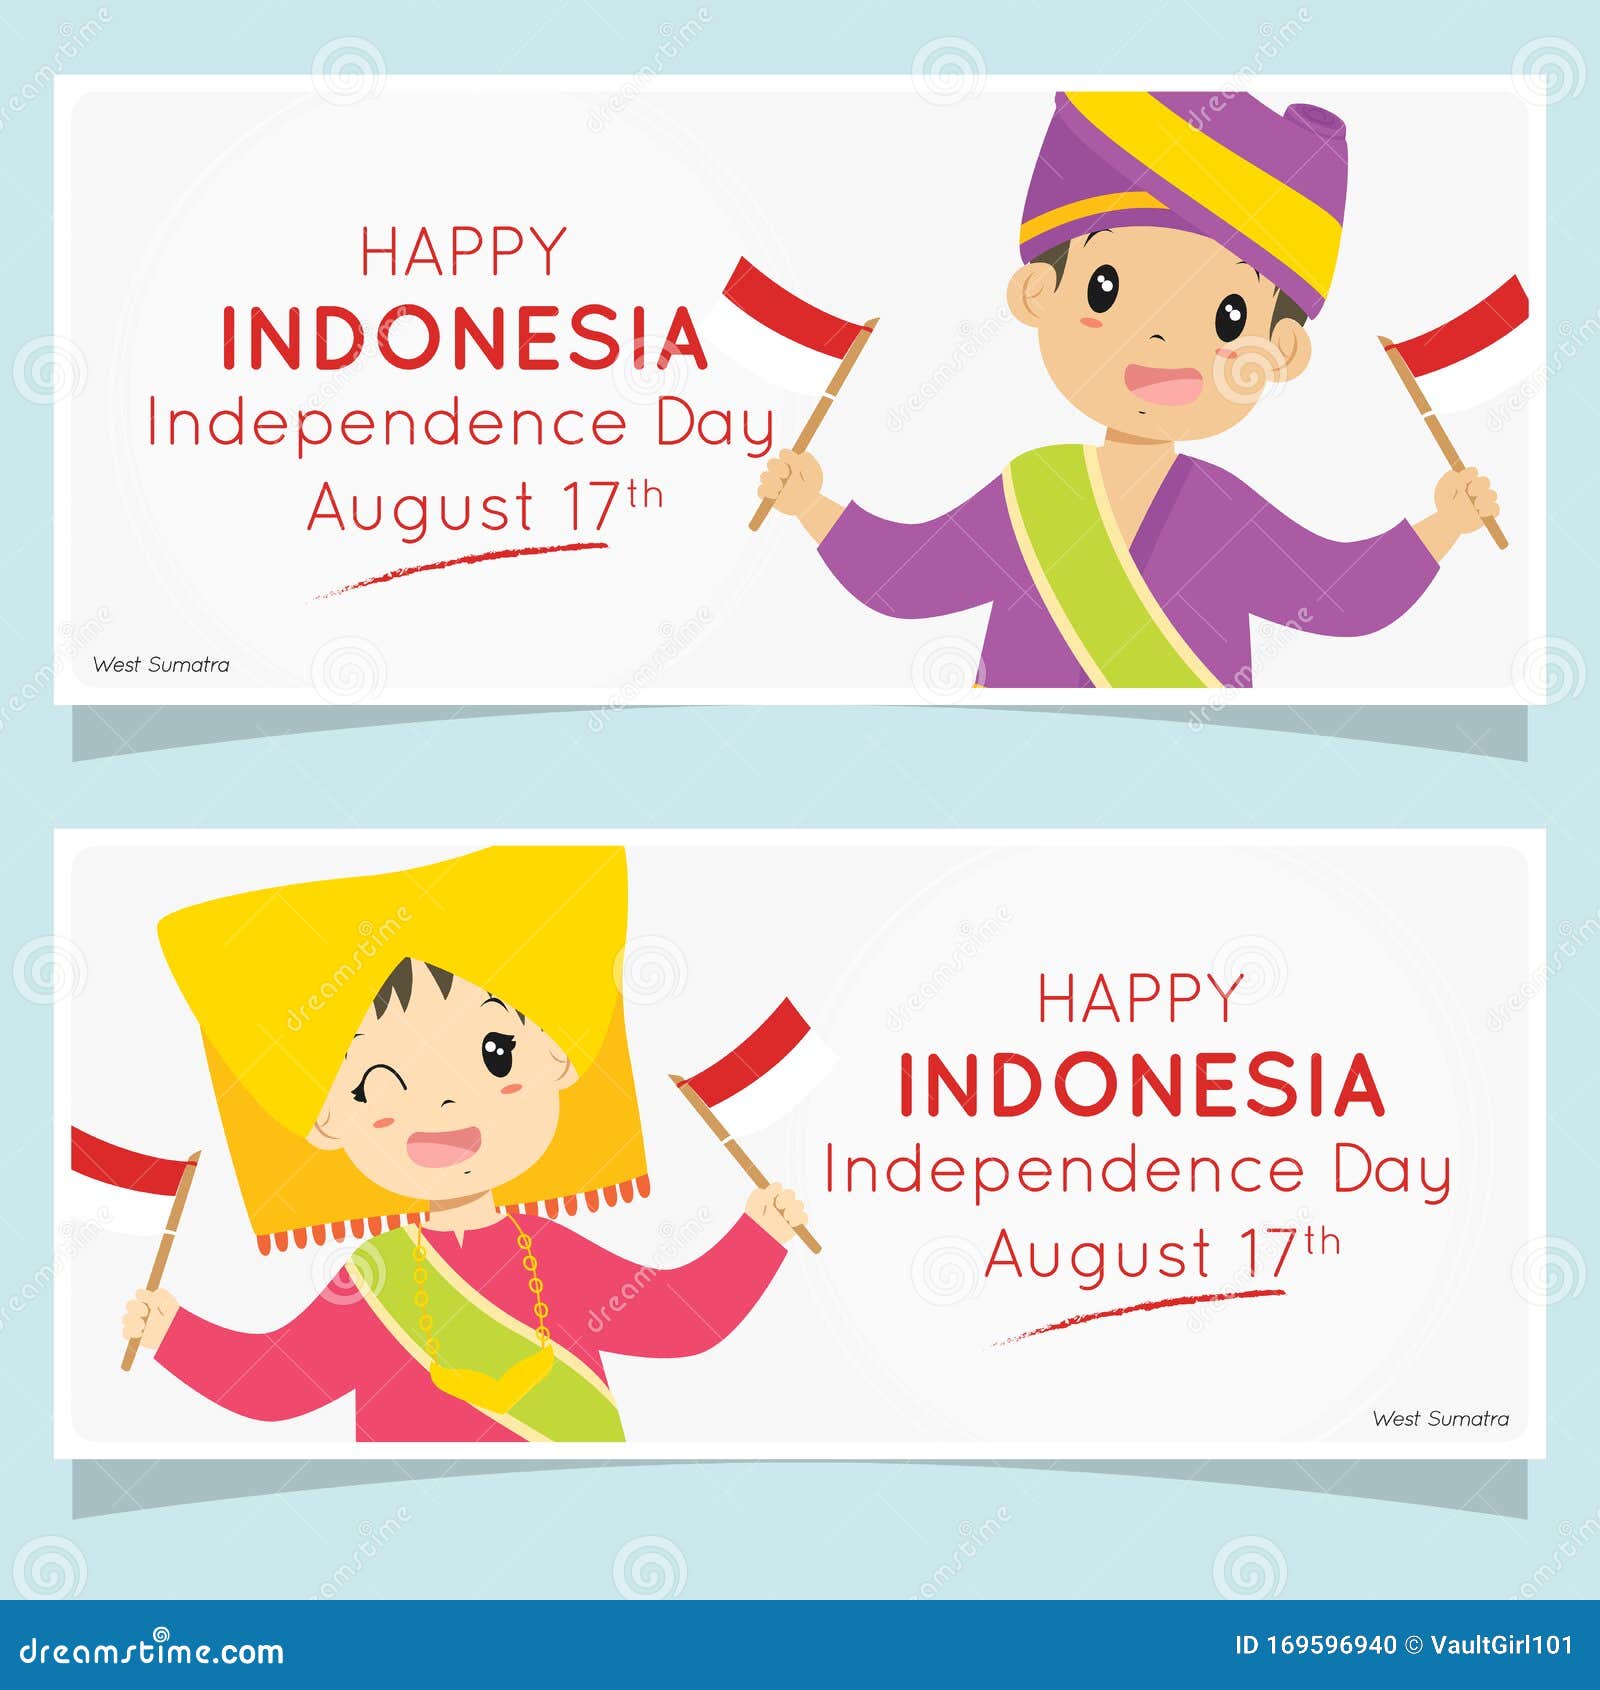 Indonesia Independence Day Banner. West Sumatra, Padang Children Holding  Flags. Cartoon Vector Design Stock Vector - Illustration of flag,  background: 169596940